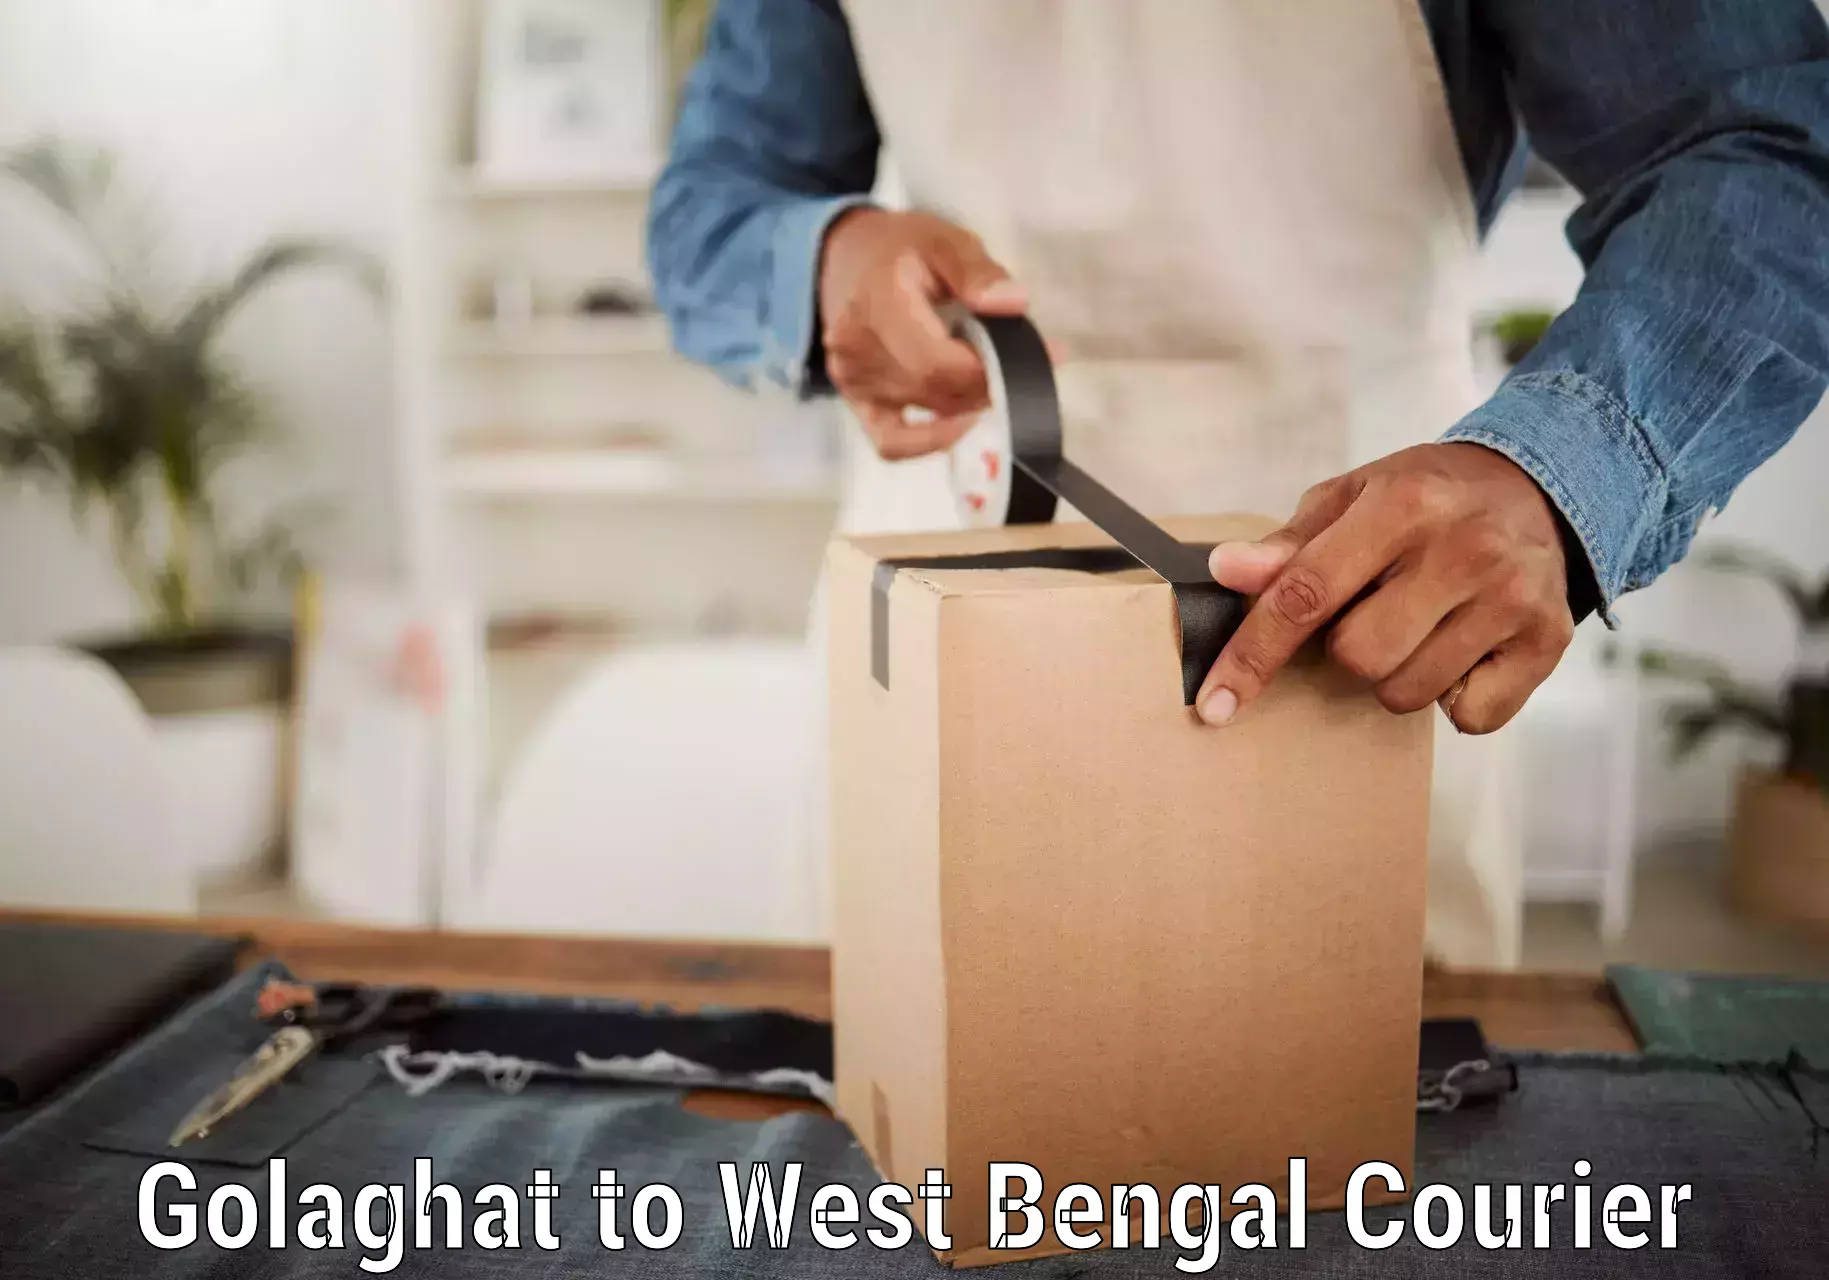 Urgent courier needs Golaghat to Purulia